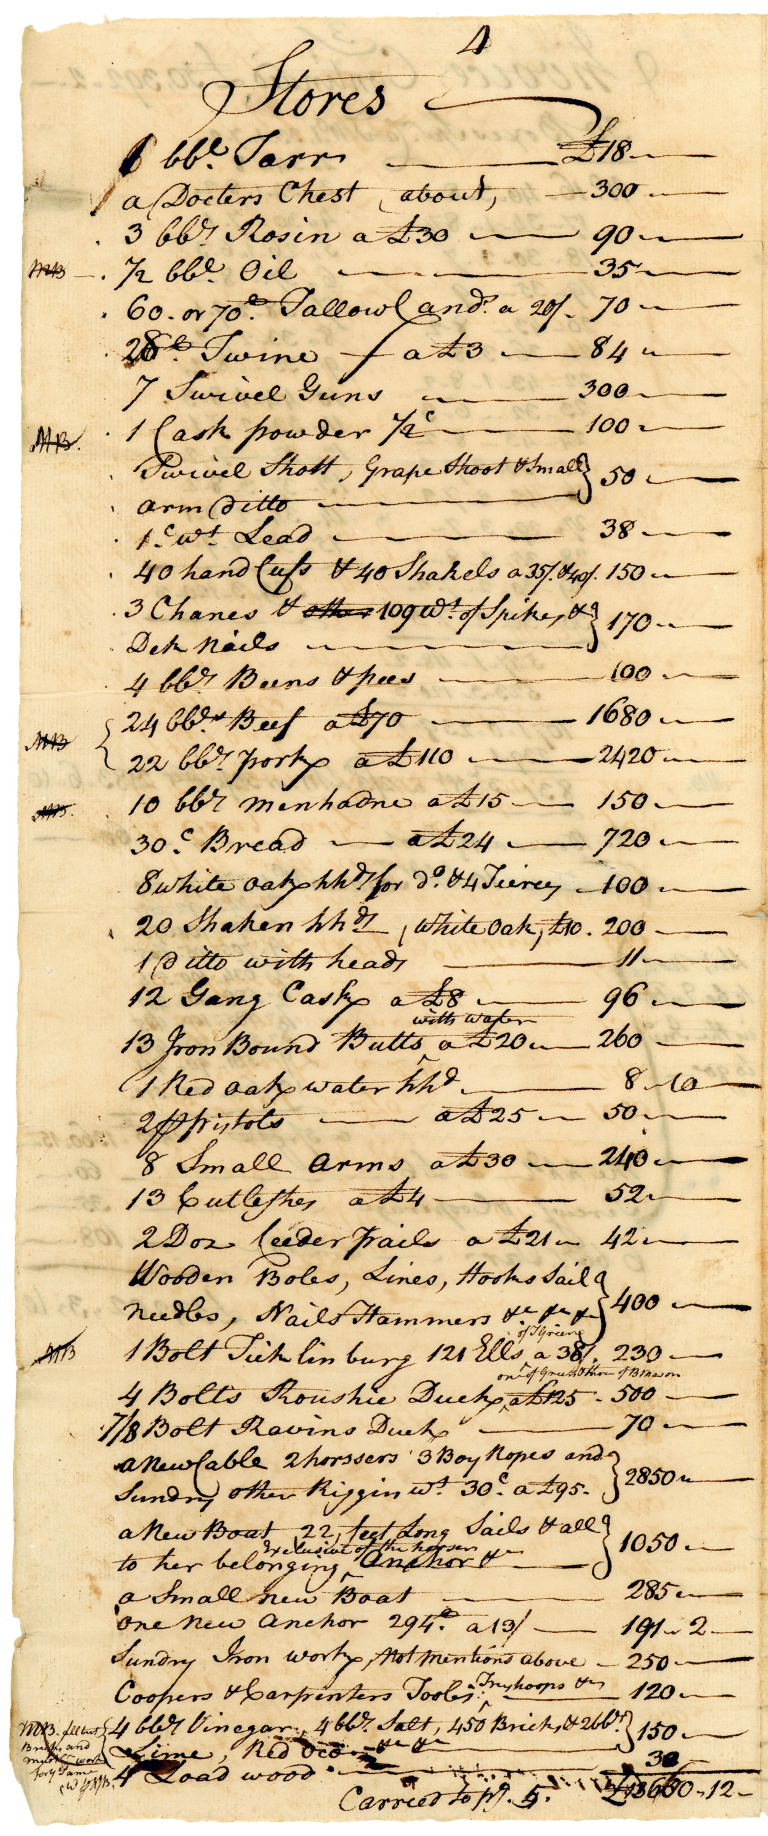 Handwritten inventory of stores loaded onto the Sally